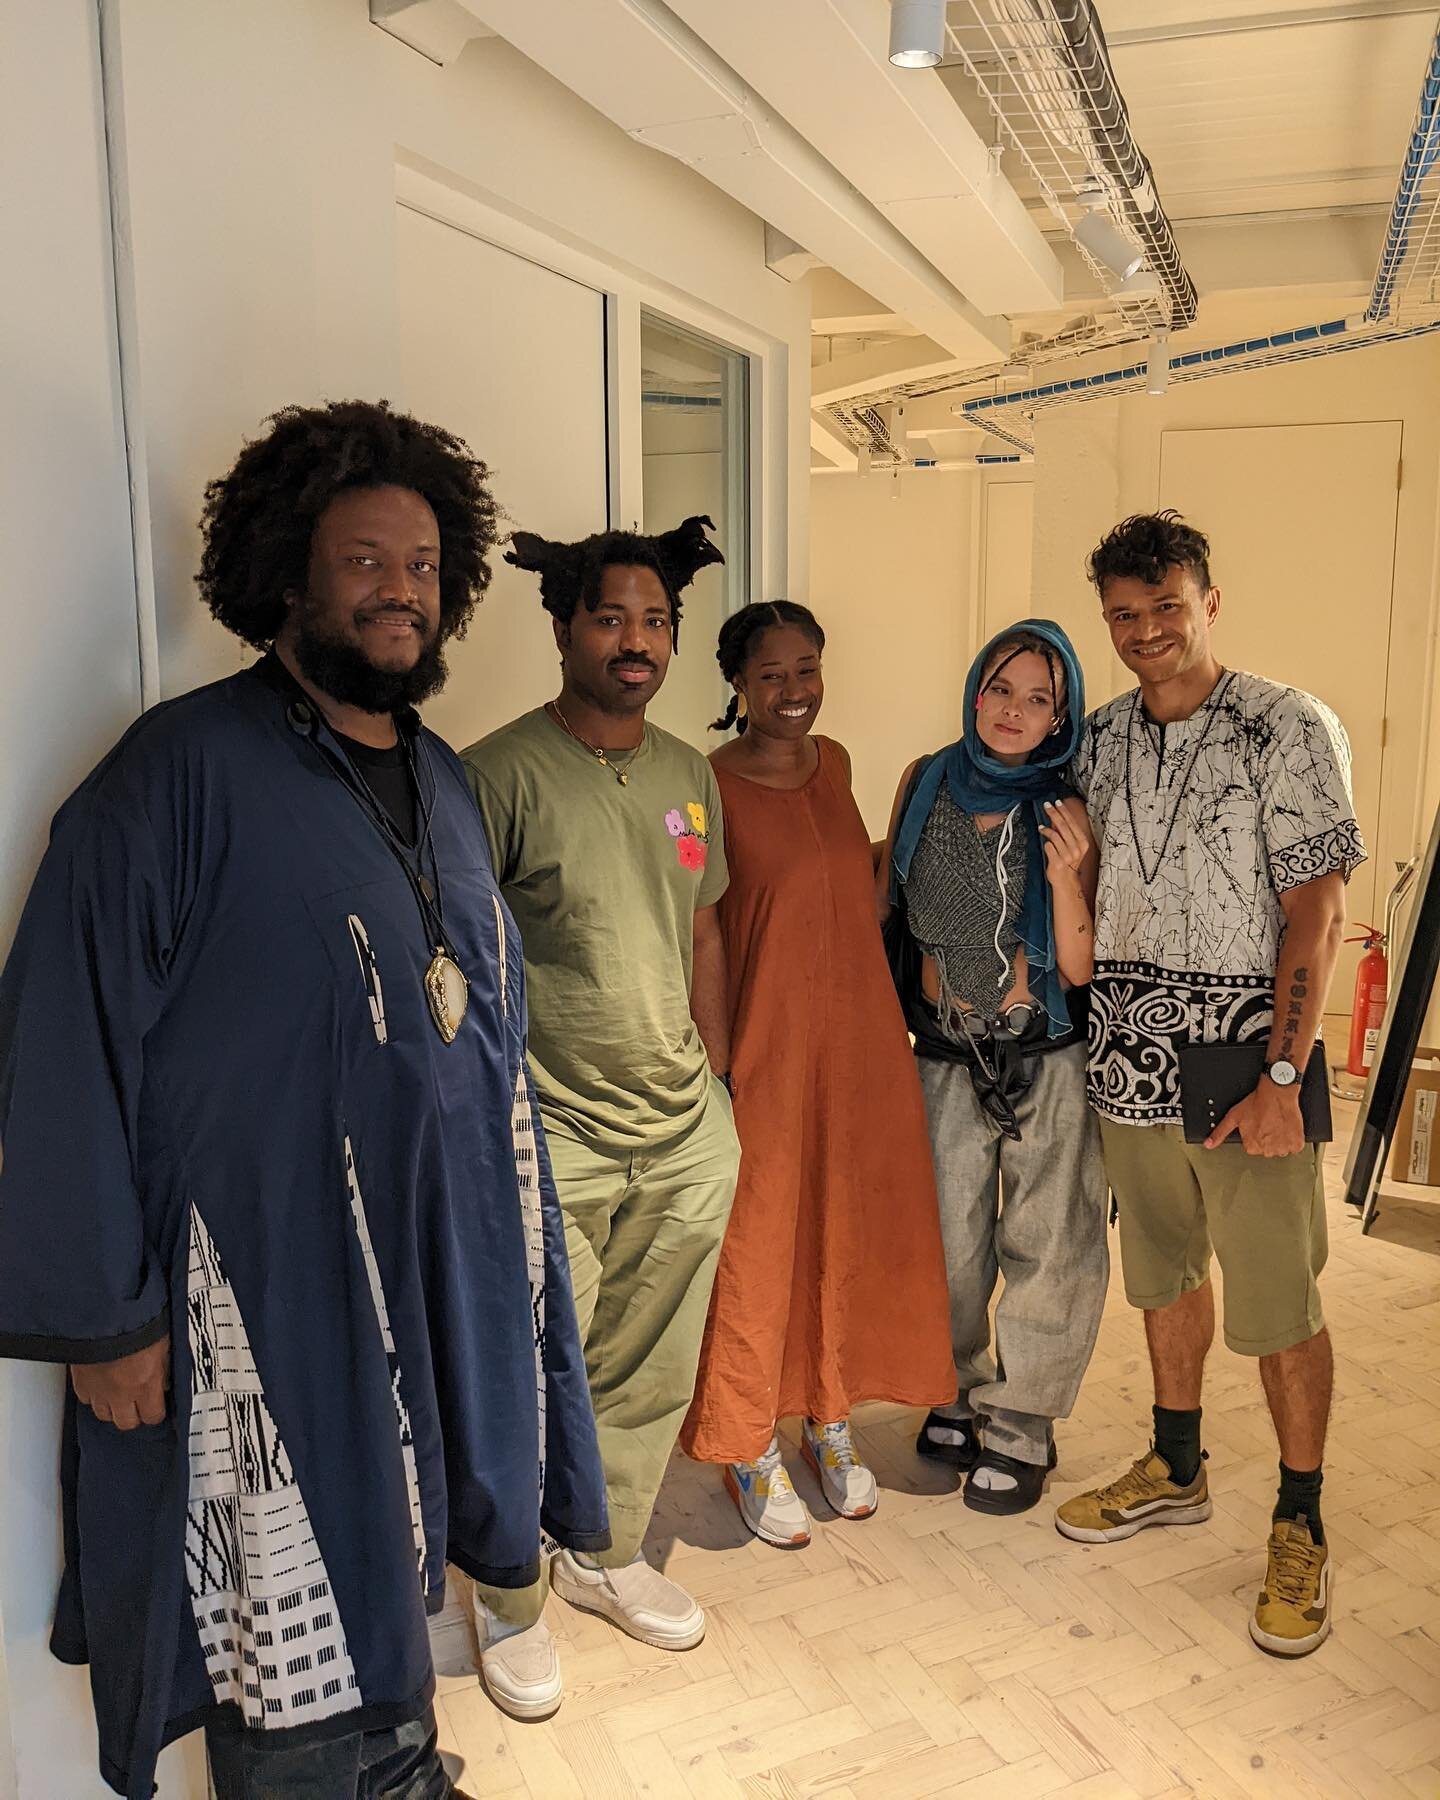 A beautifully challenging collaboration set by @burleyfisher was to sit in a jam session with the poet @victoriaadukweibulley &amp; four musicians meeting for the first time (Kamasi Washington, Sampha, Saya Grey &amp; Valentina Magaletti) &amp; write